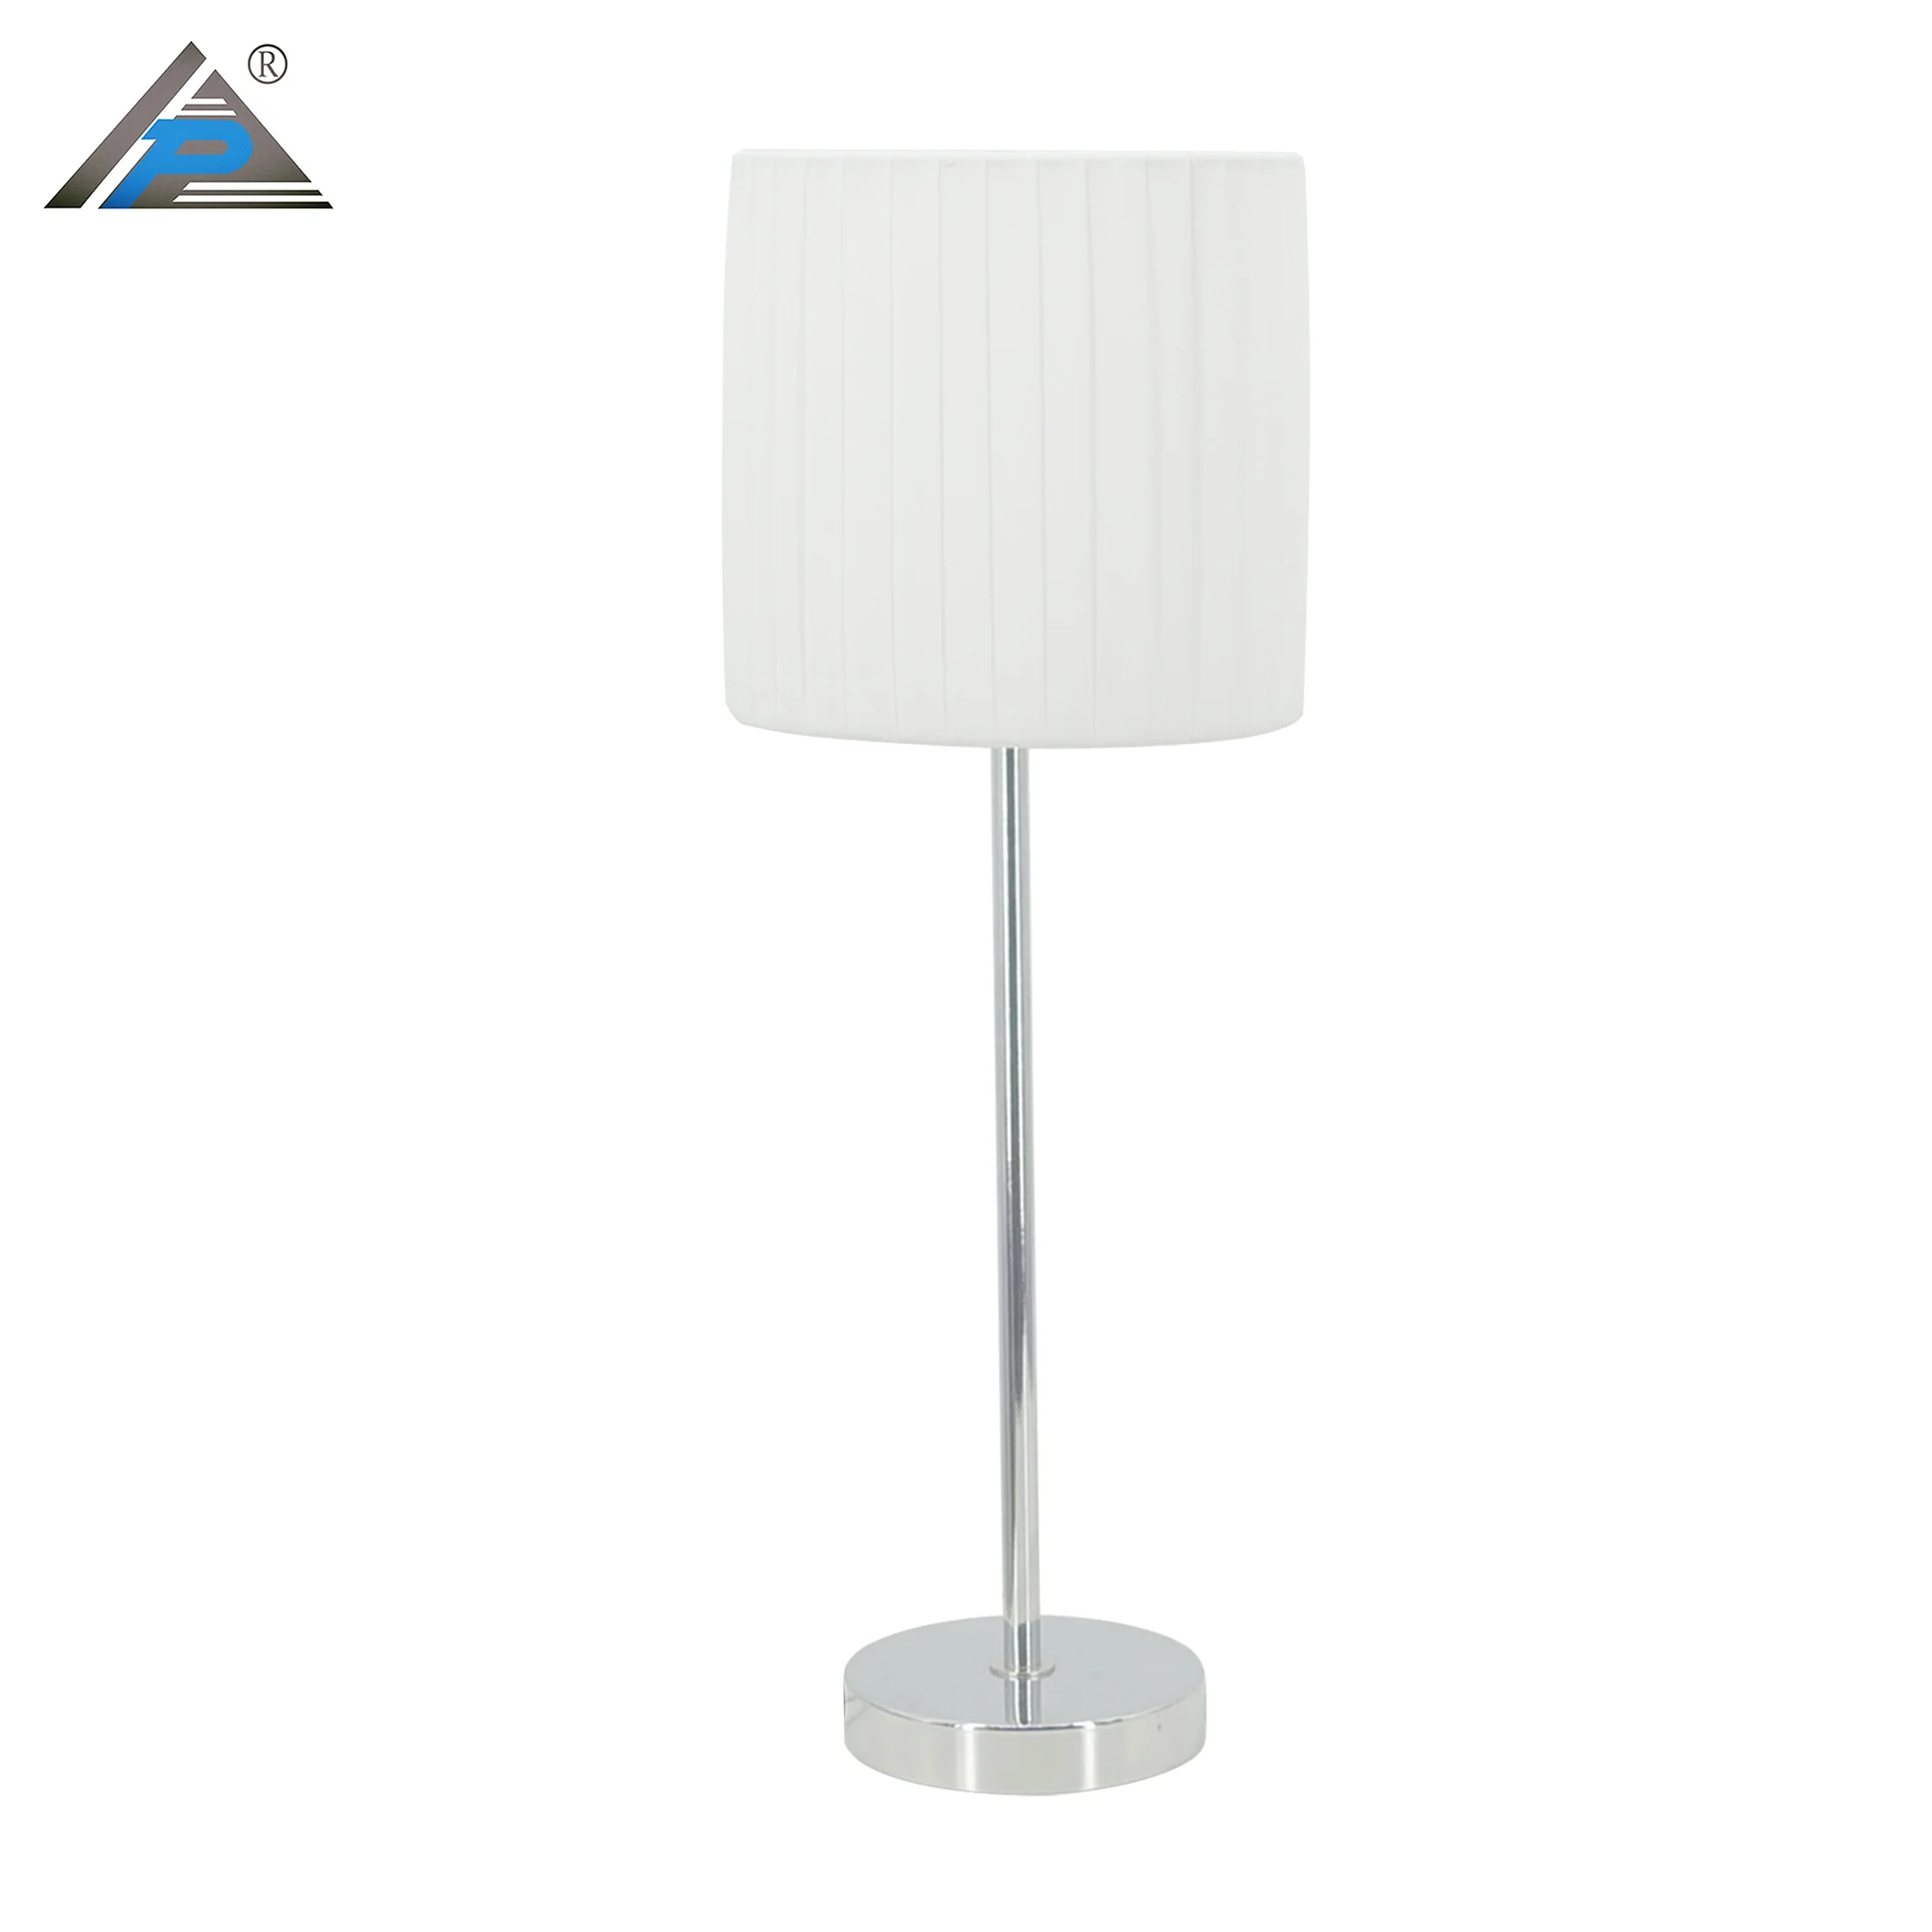 Classic Design Plited style with Brush Nickle Finished Design E27 Table Lamp with PE Shade for Bedside Decorative